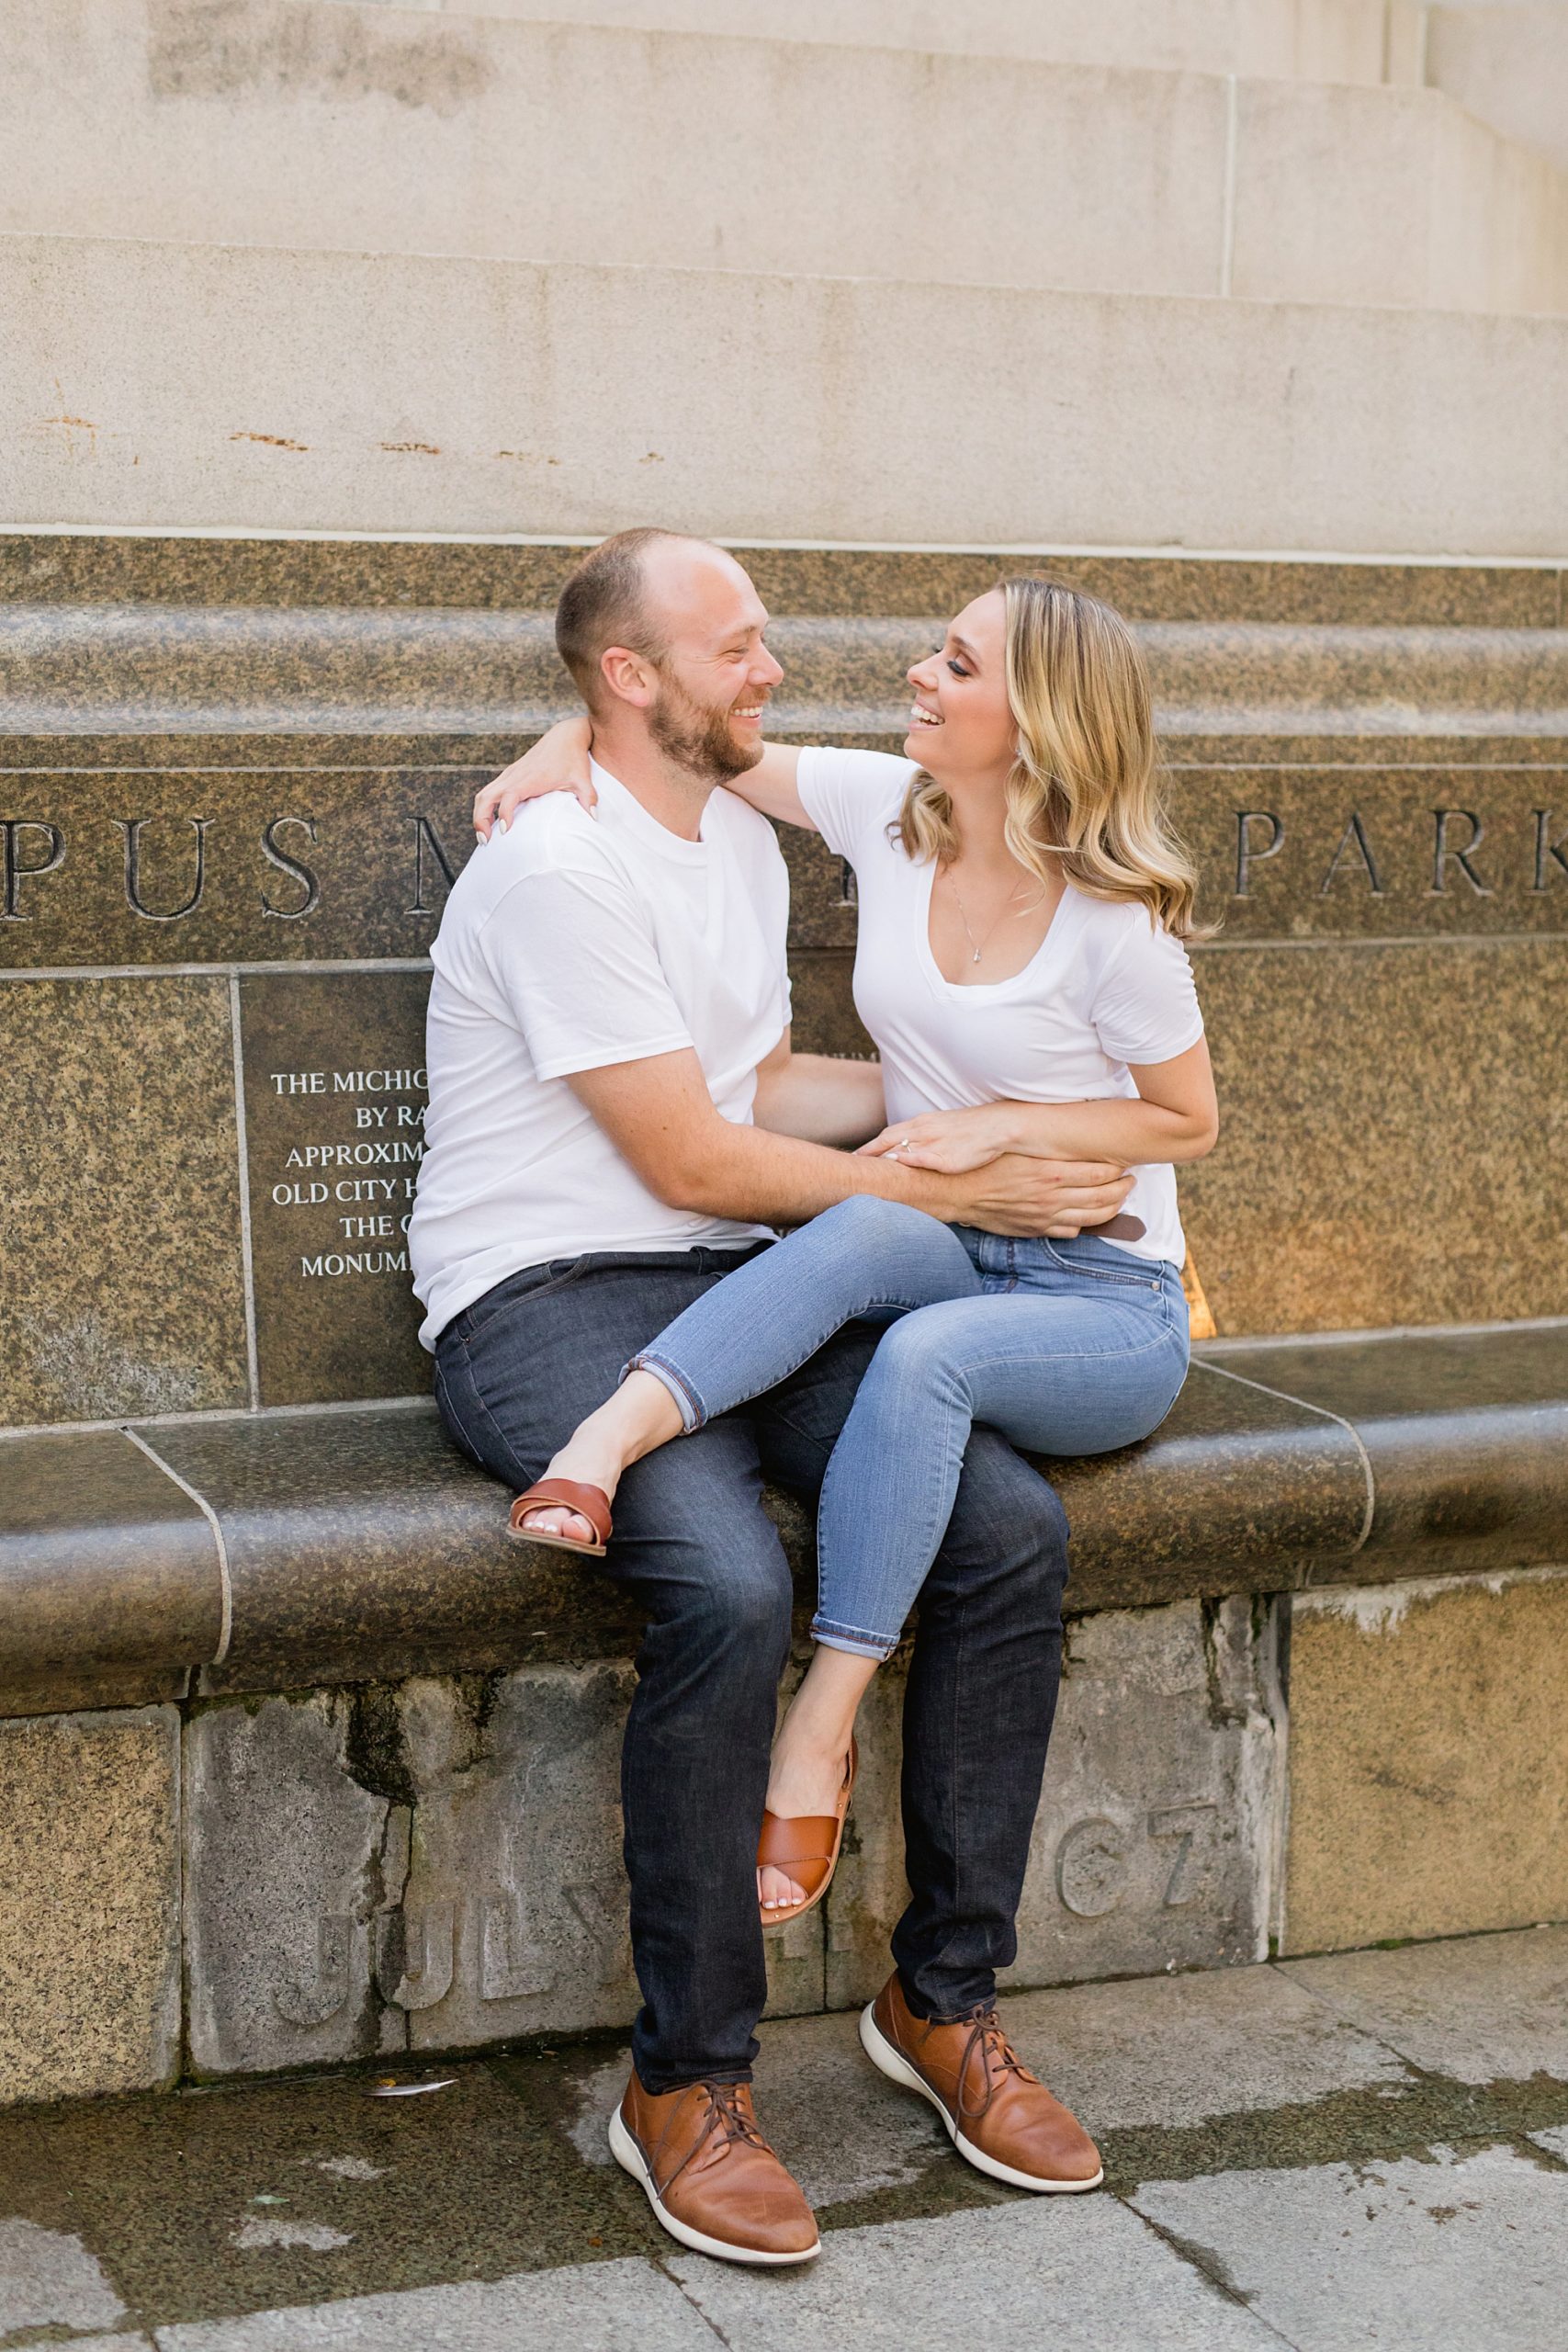 couple laughing and playing during engagement photo shoot